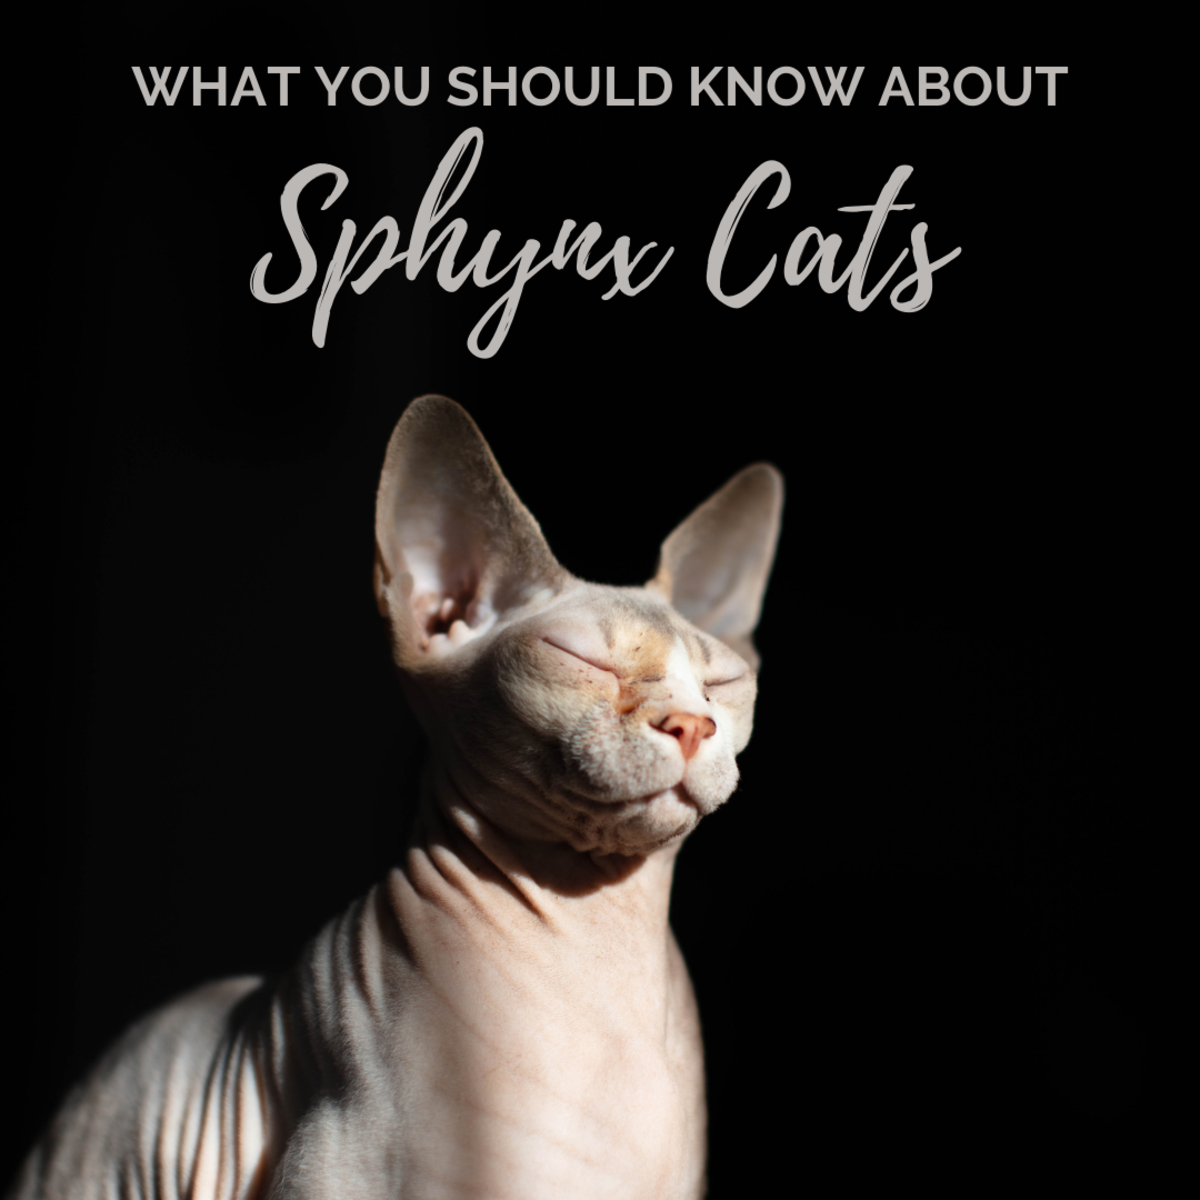 I. Introduction to Sphynx Cats